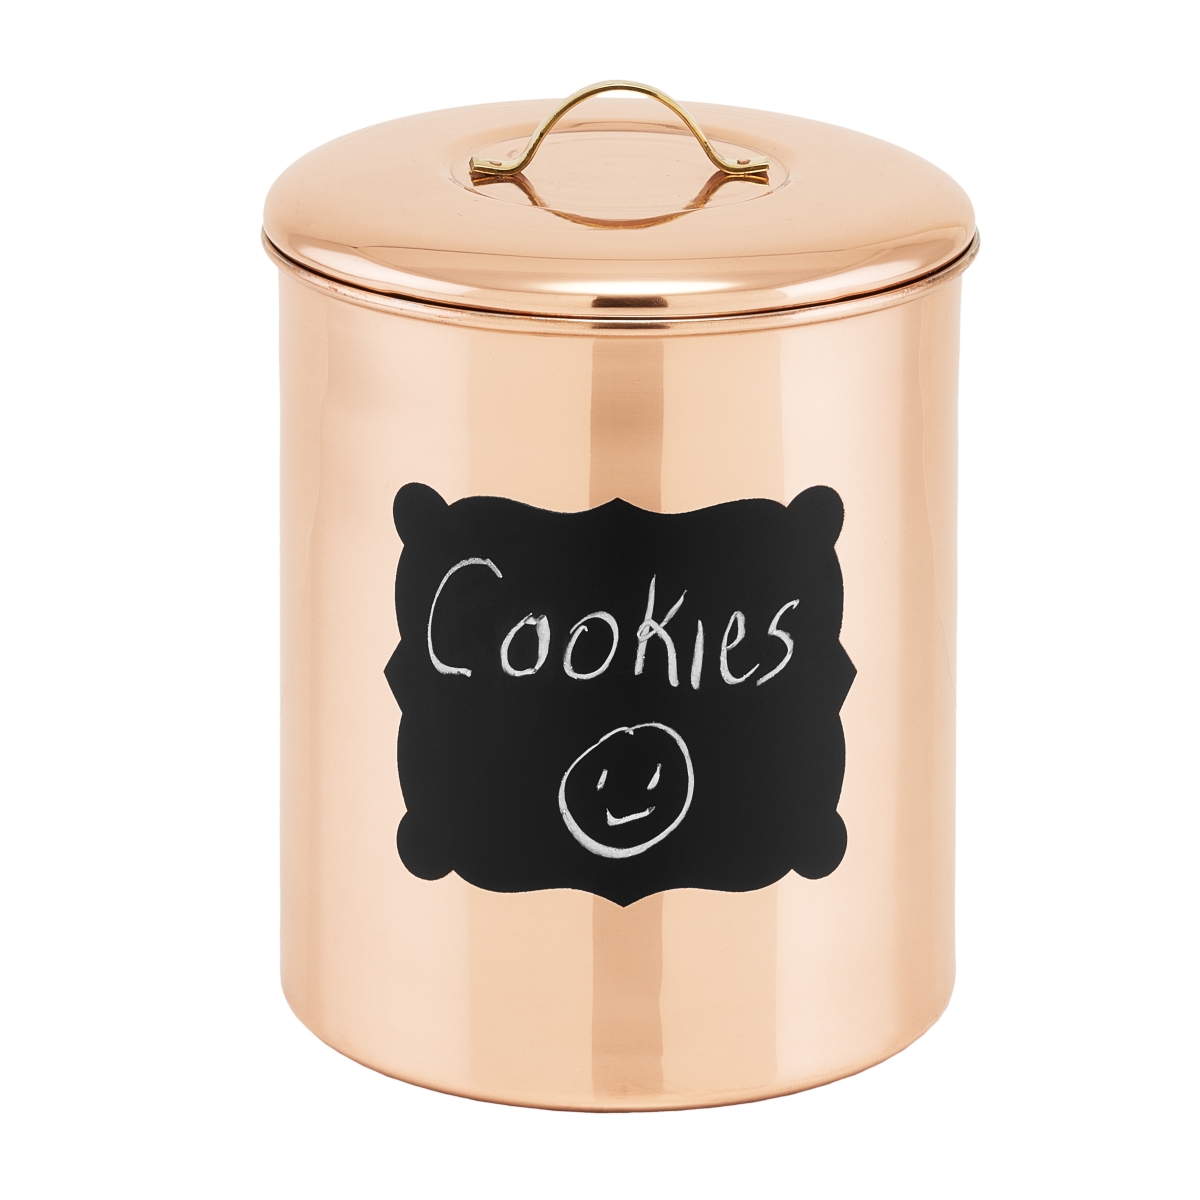 1144 6.75 X 7.5 In. Chalkboard Cookie Jar With Fresh Seal Cover, Copper - 4 Qt.